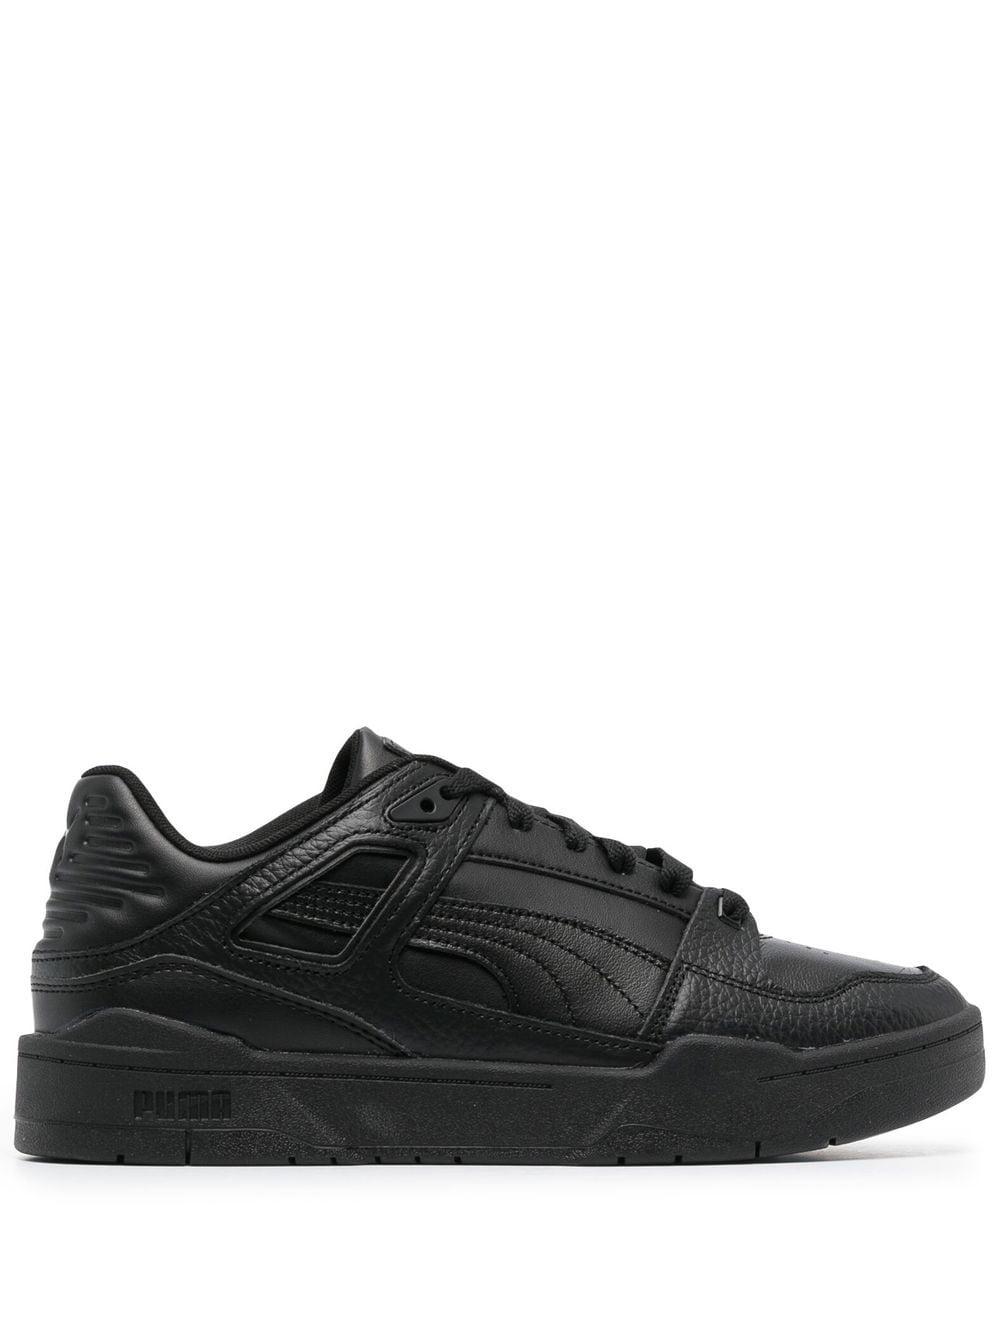 PUMA Slipstream Lace-up Sneakers in Black for Men | Lyst